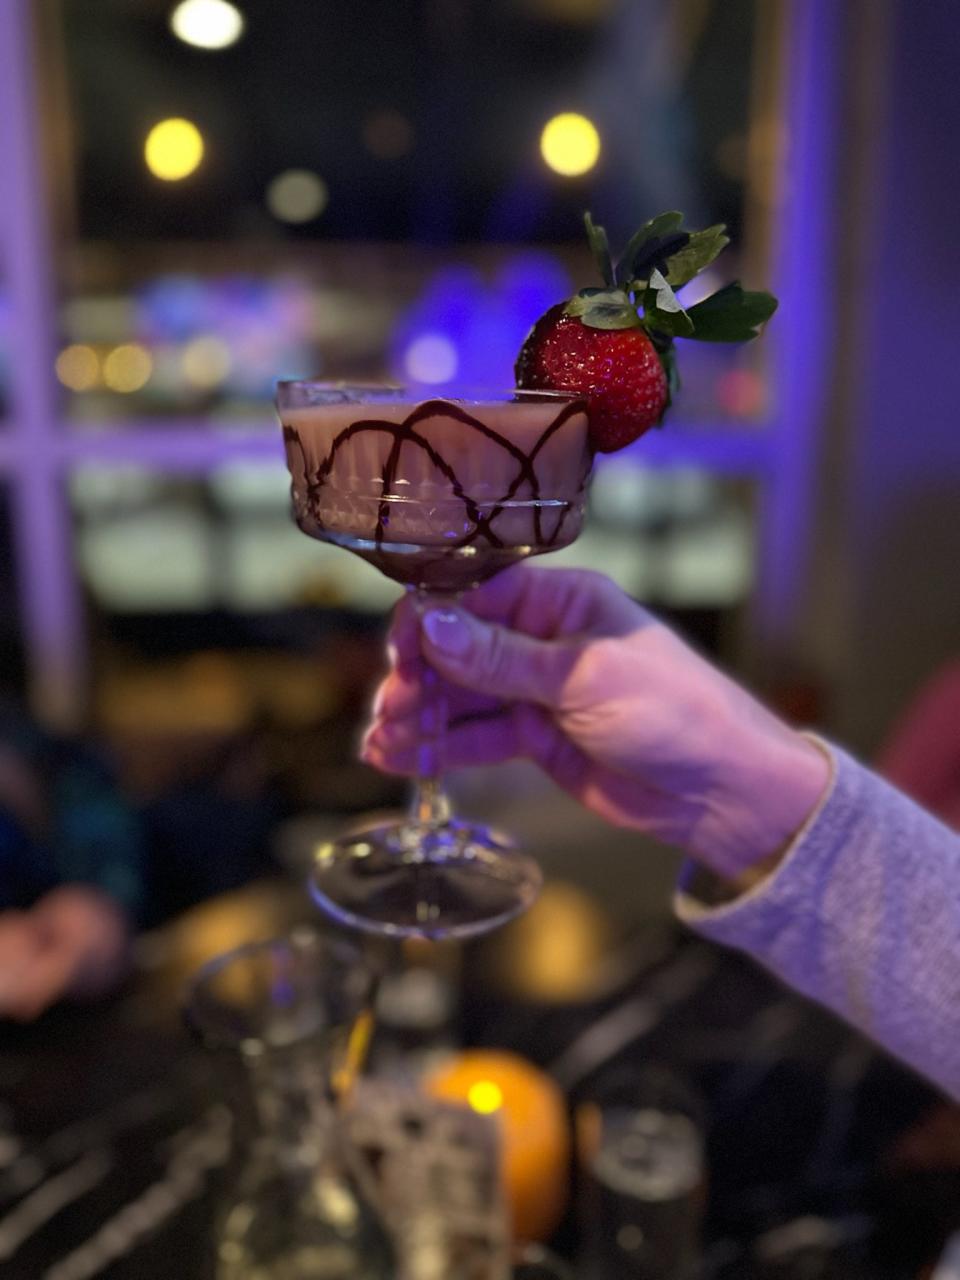 The Chocolate-Covered Strawberry, a Valentine's Day cocktail featured this month at Ashylnn Distillery in Morrisville, is made with Summerseat Vodka, crème de cocoa, bourbon cream, housemade Strawberry syrup and garnished with a bruleed chocolate-drizzled strawberry.